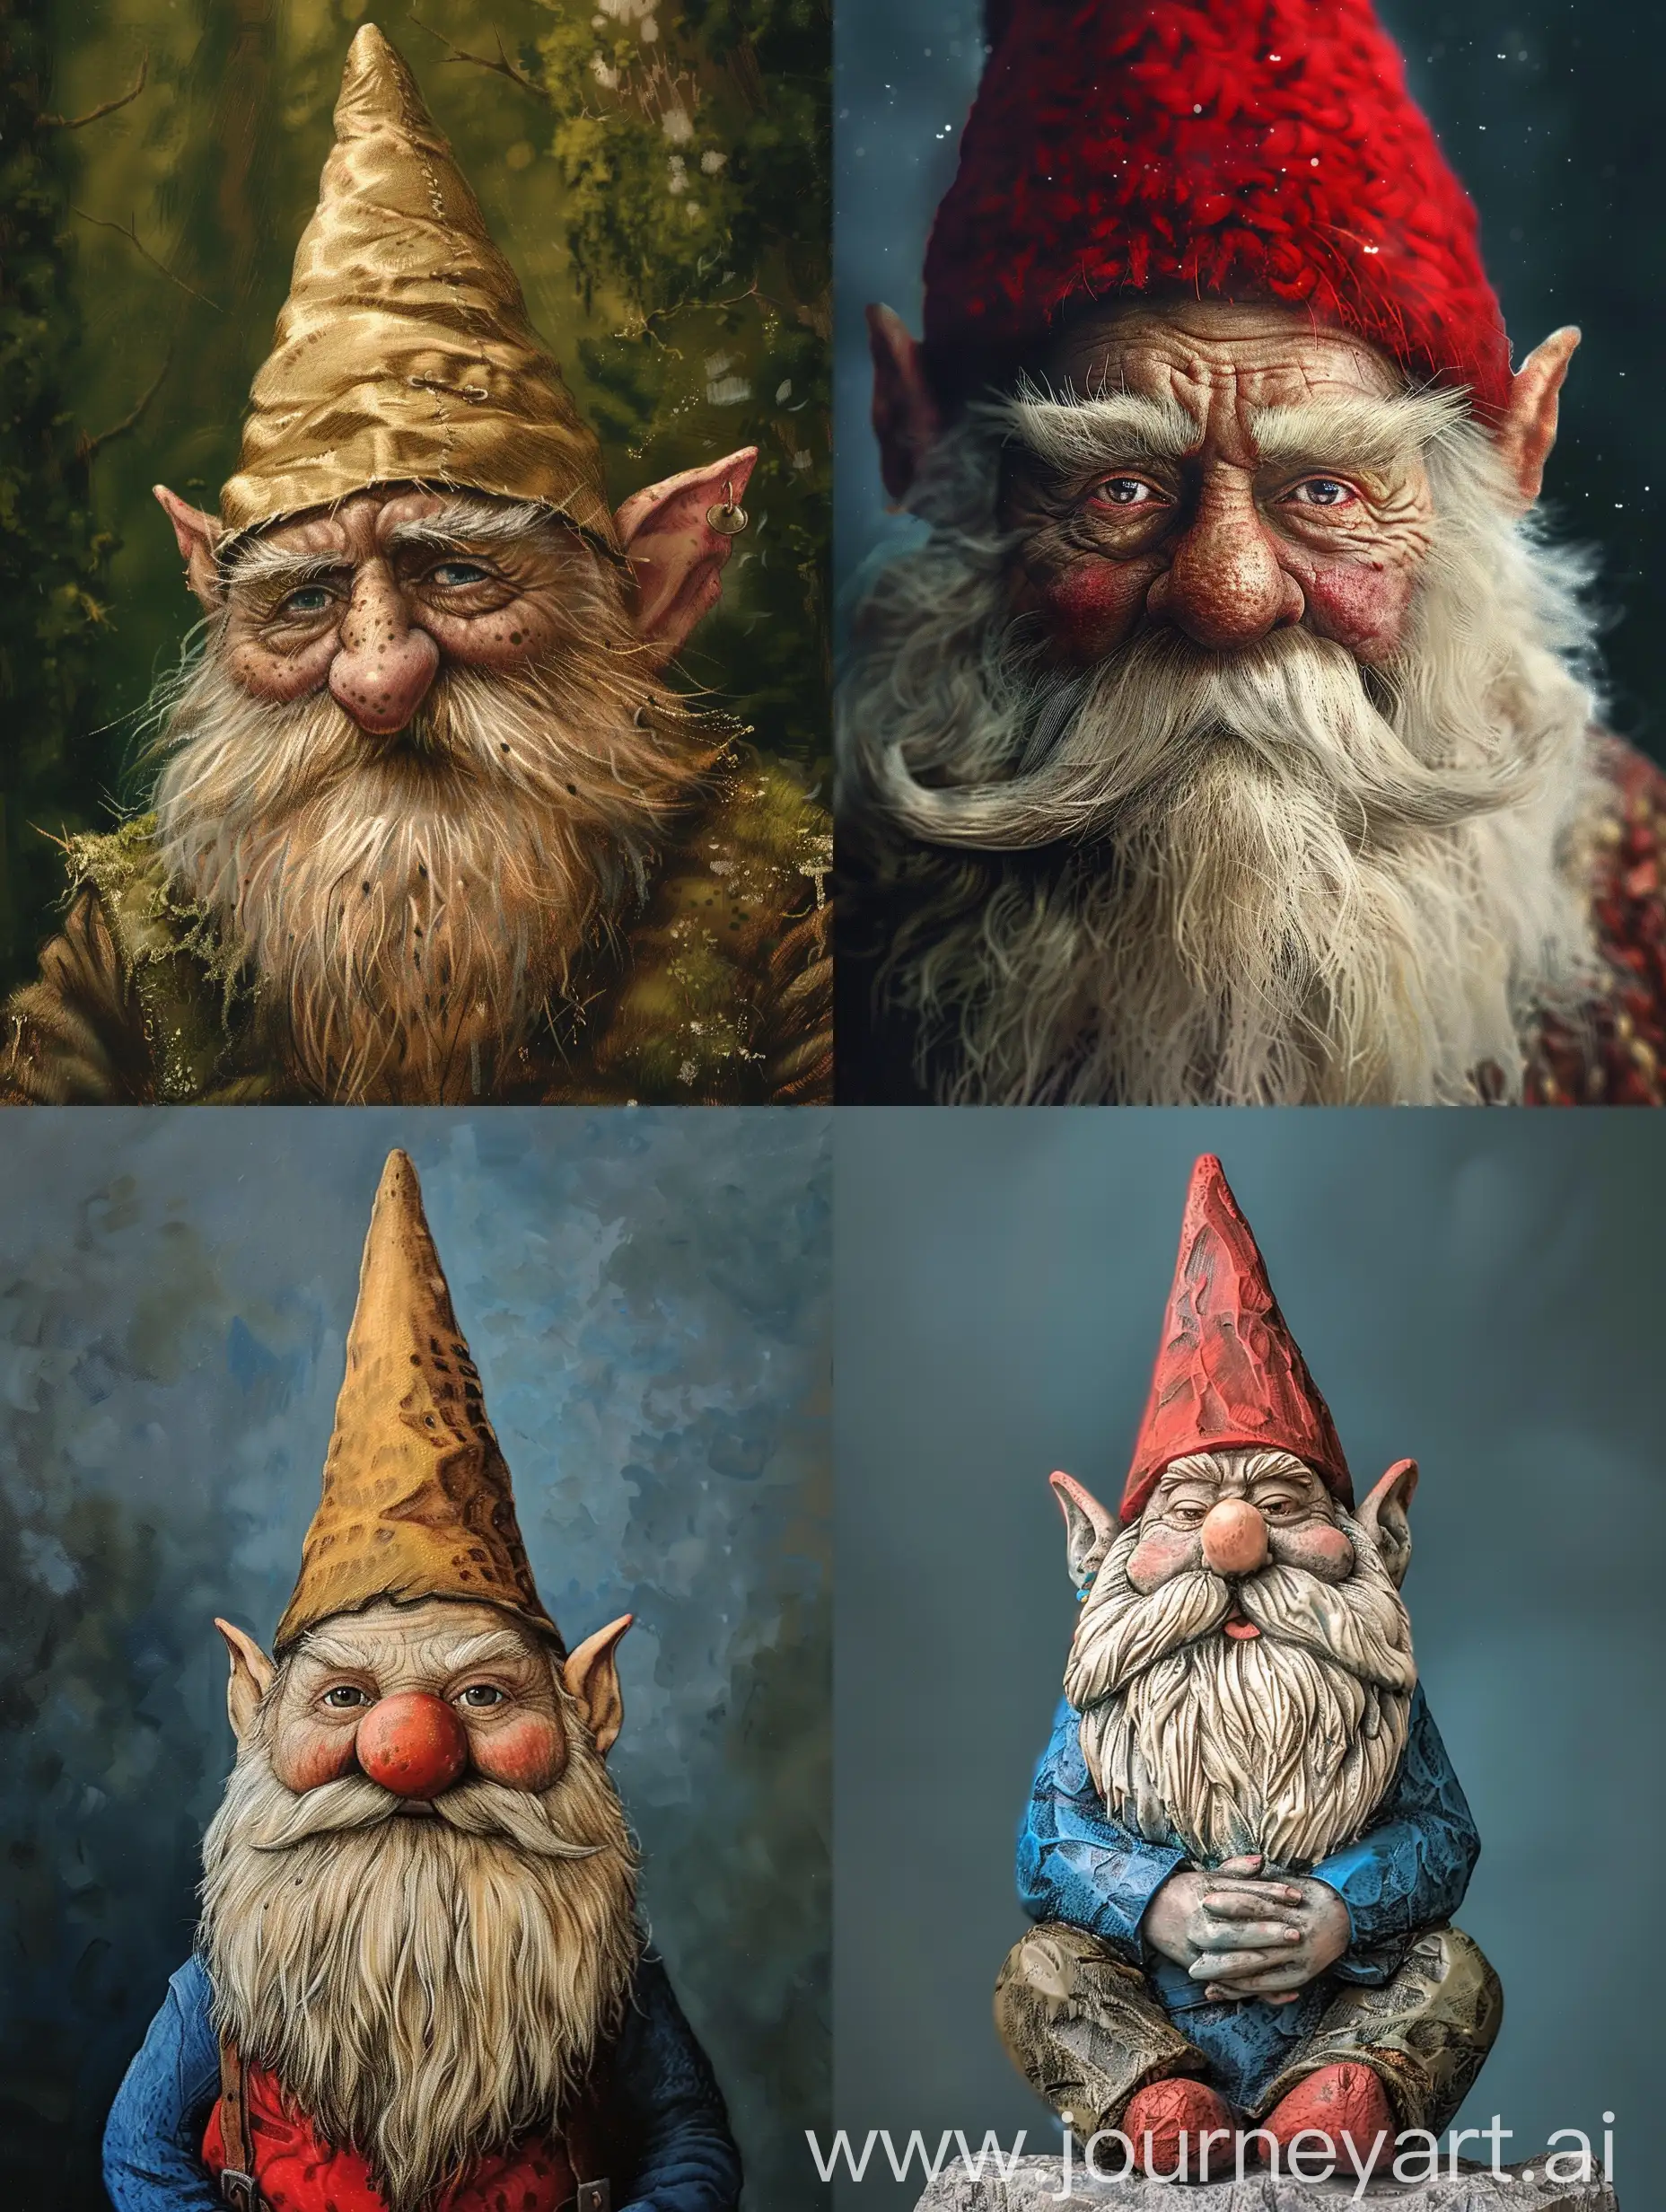 Enchanting-Gnome-Portrait-with-Intricate-Details